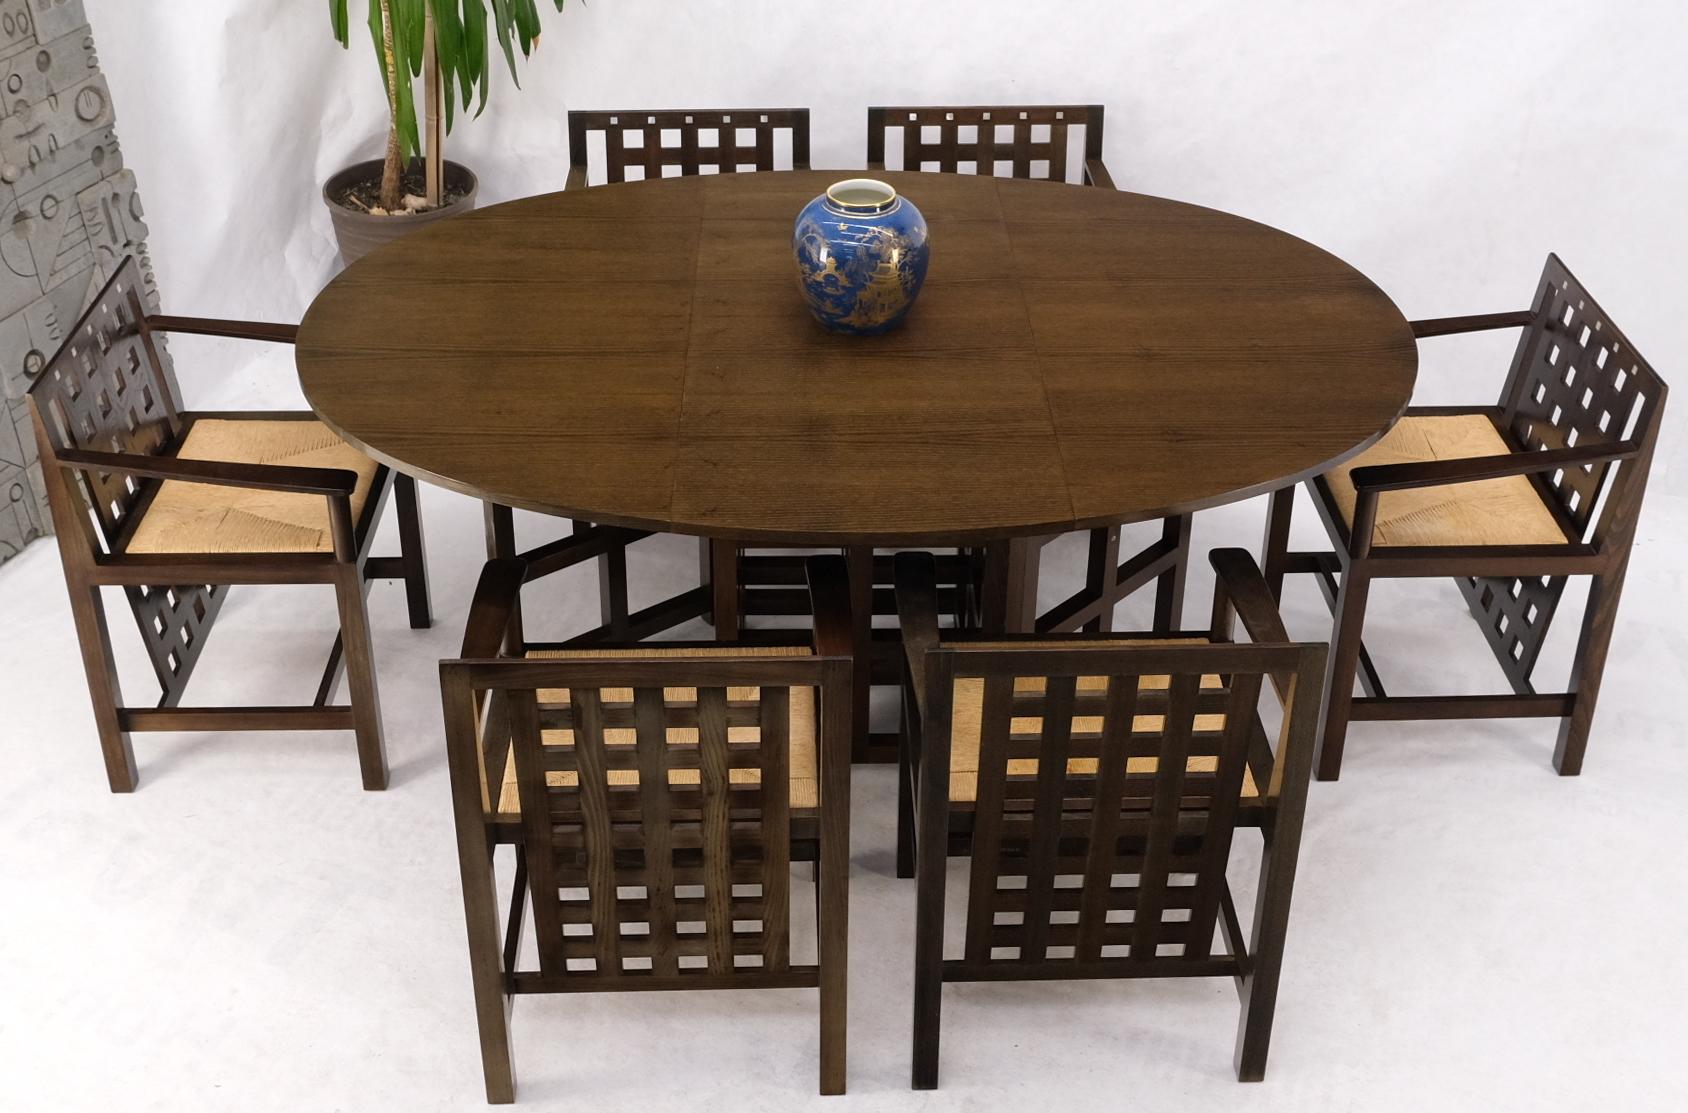 20th Century Brown Oak Cassina Macintosh Drop Leaf Dining Table 6 Rush Seat Chairs Set Mint For Sale